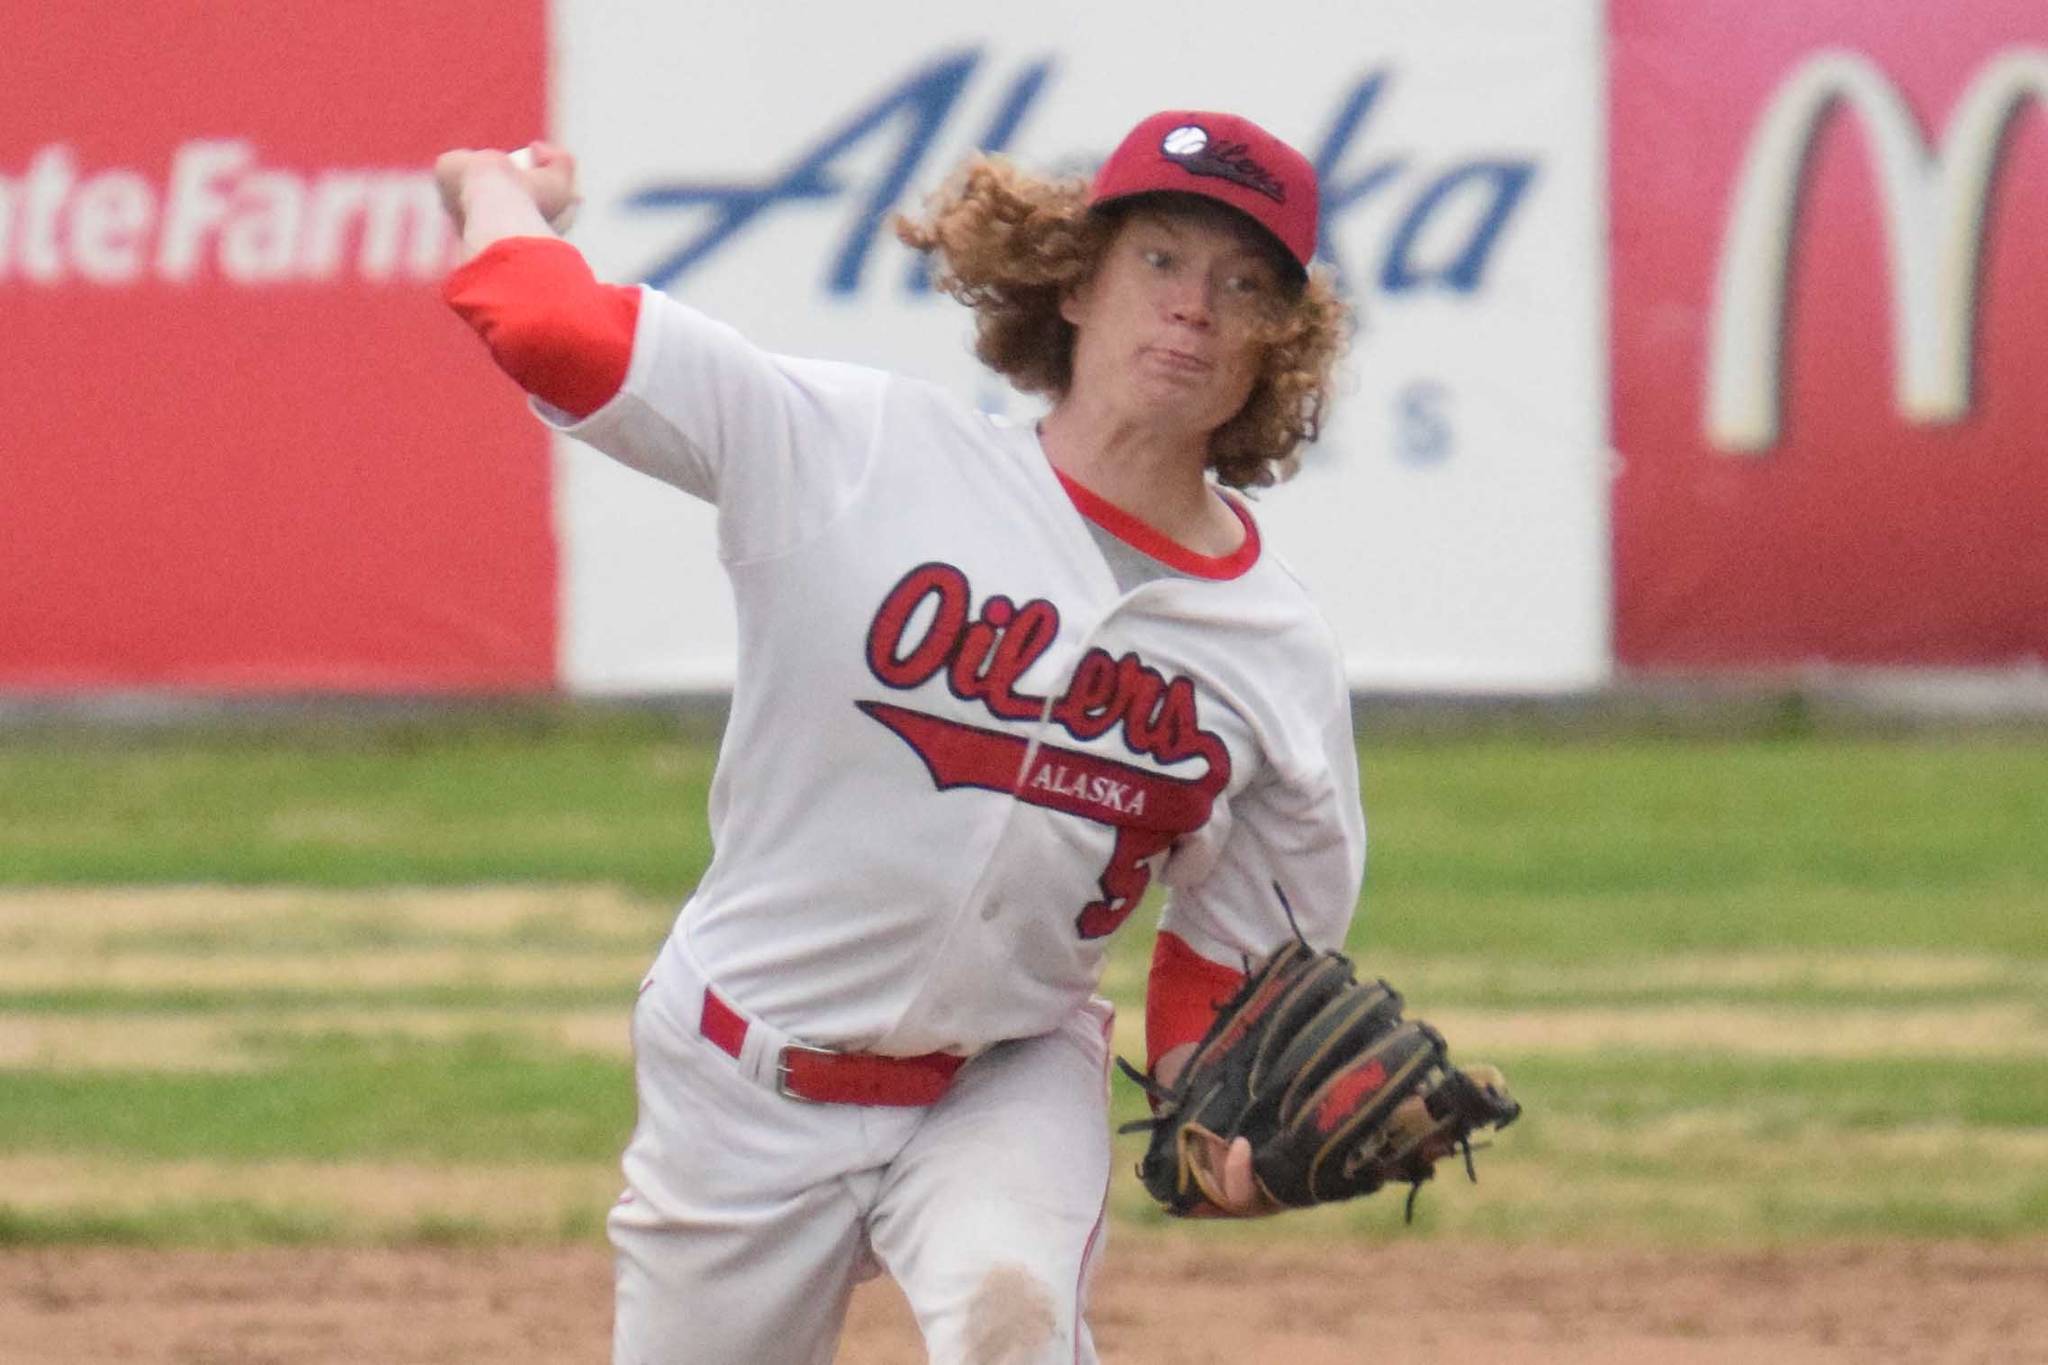 Peninsula Oilers reliever Mose Hayes delivers to the Anchorage Bucs on Friday, June 26, 2021, at Coral Seymour Memorial Park in Kenai, Alaska. (Photo by Jeff Helminiak/Peninsula Clarion)